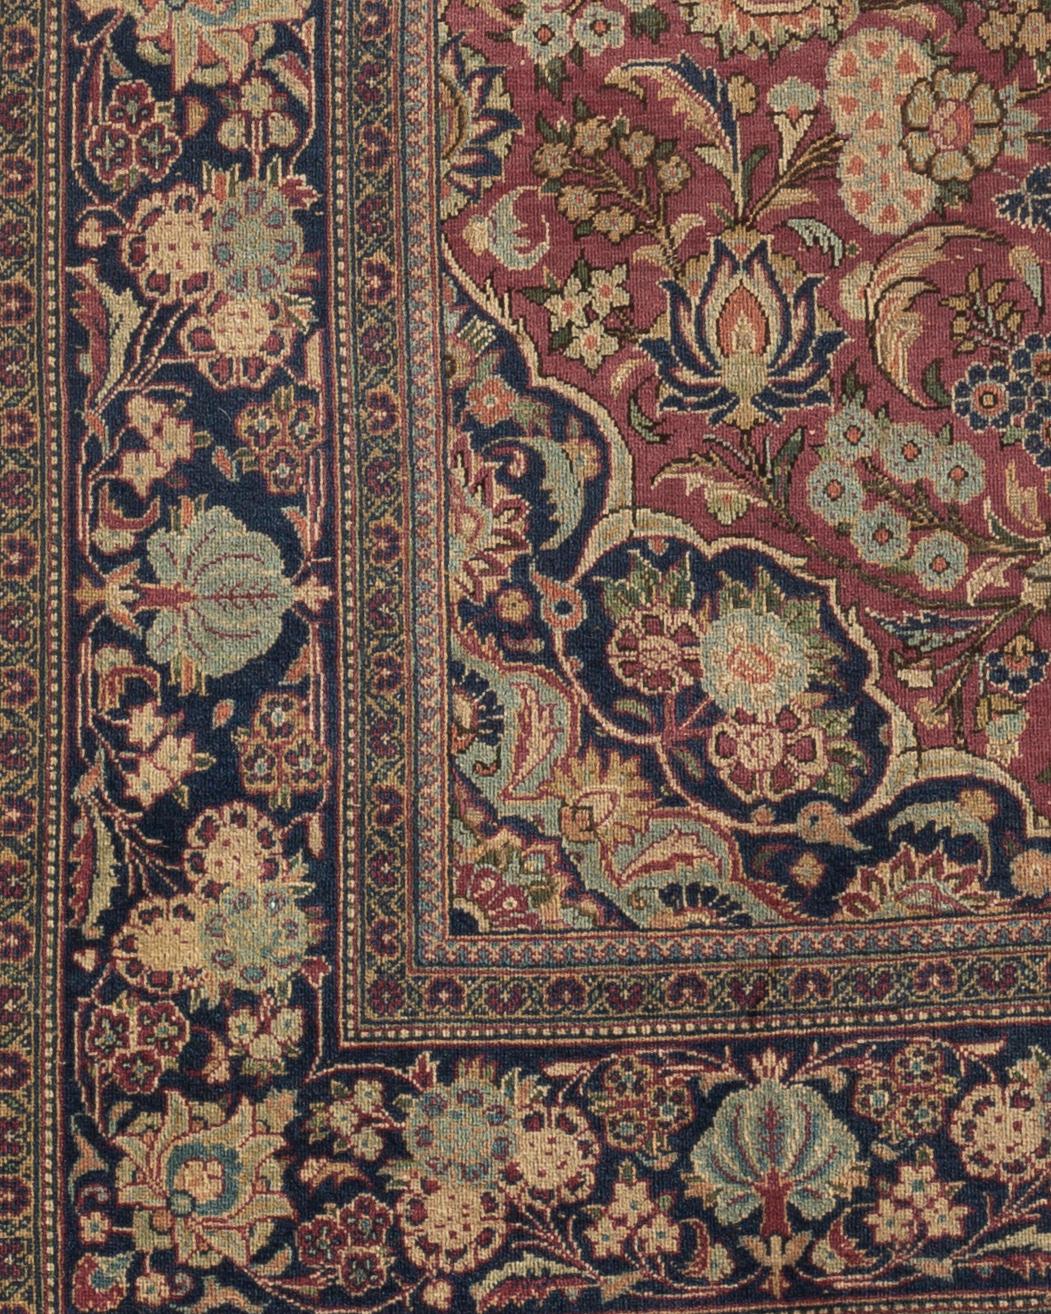 20th Century Antique Persian Isphahan Rug, circa 1900 4' x 6'6 For Sale